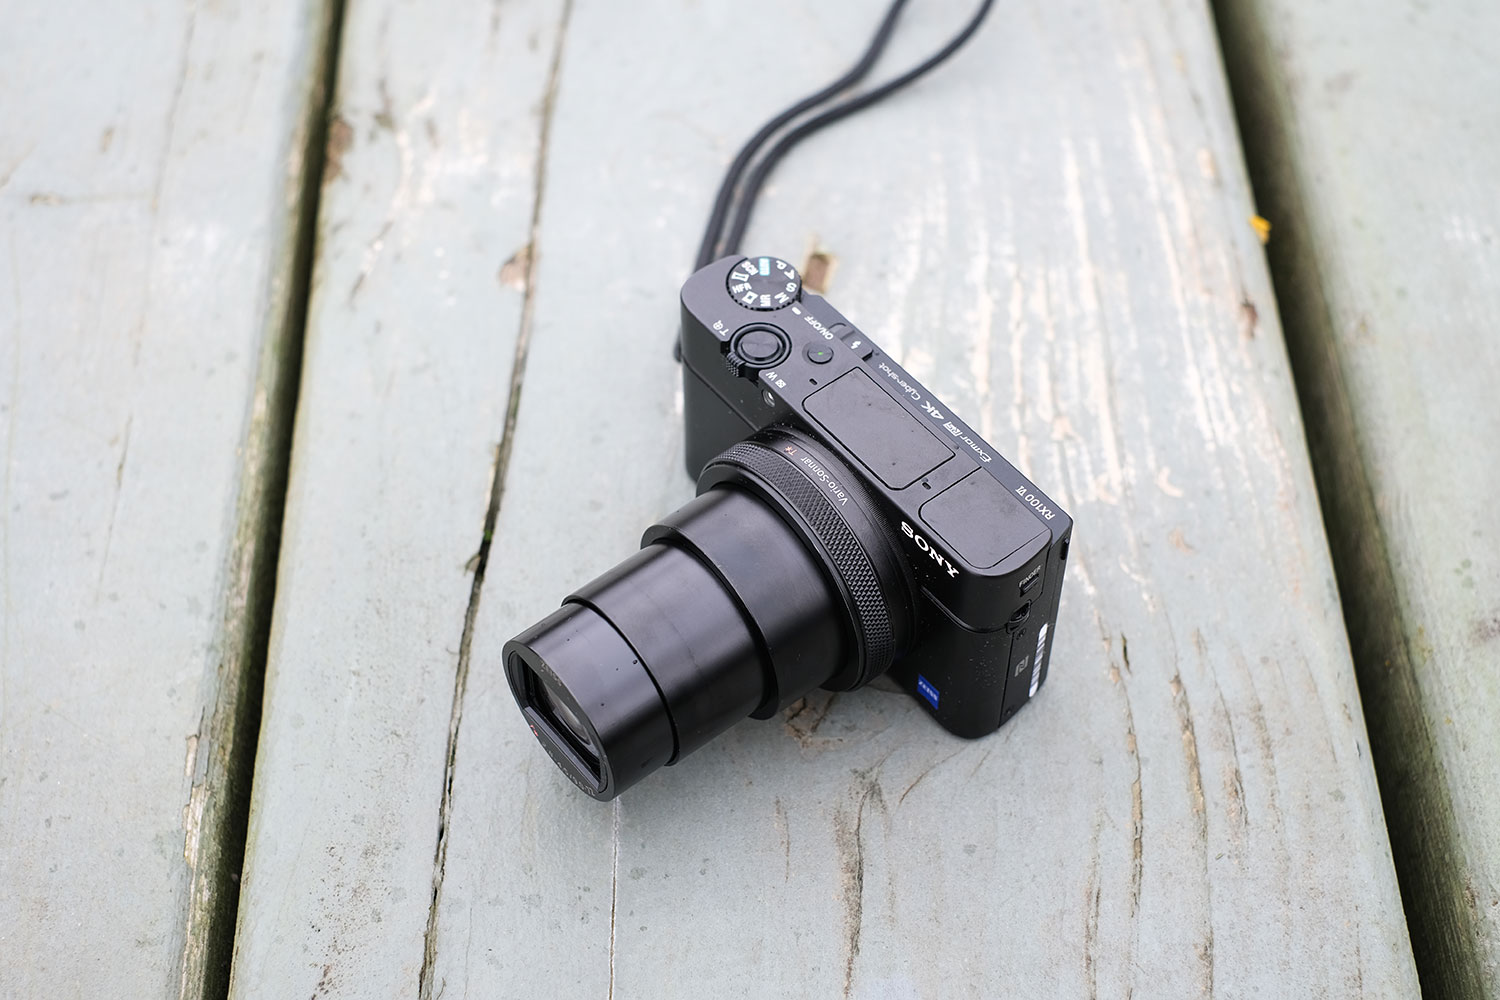 Sony RX100 VI Review, Still the Best Point-and-Shoot